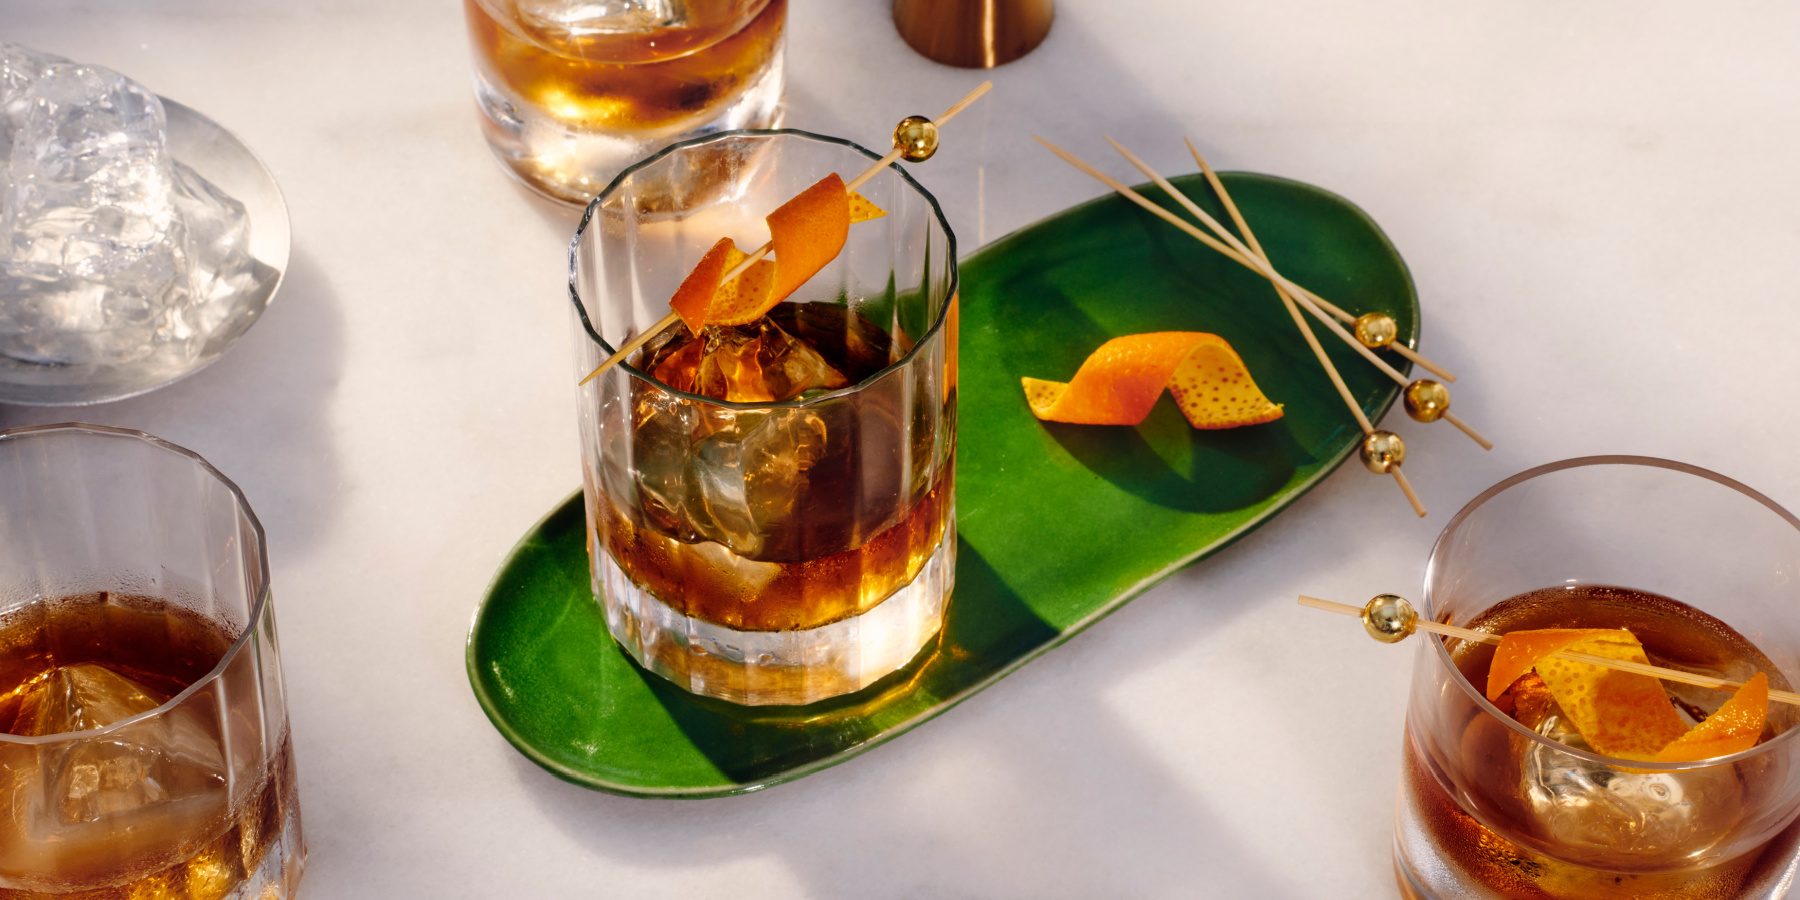 Top view of rich Old Fashioned Cocktails with Orange peel garnish